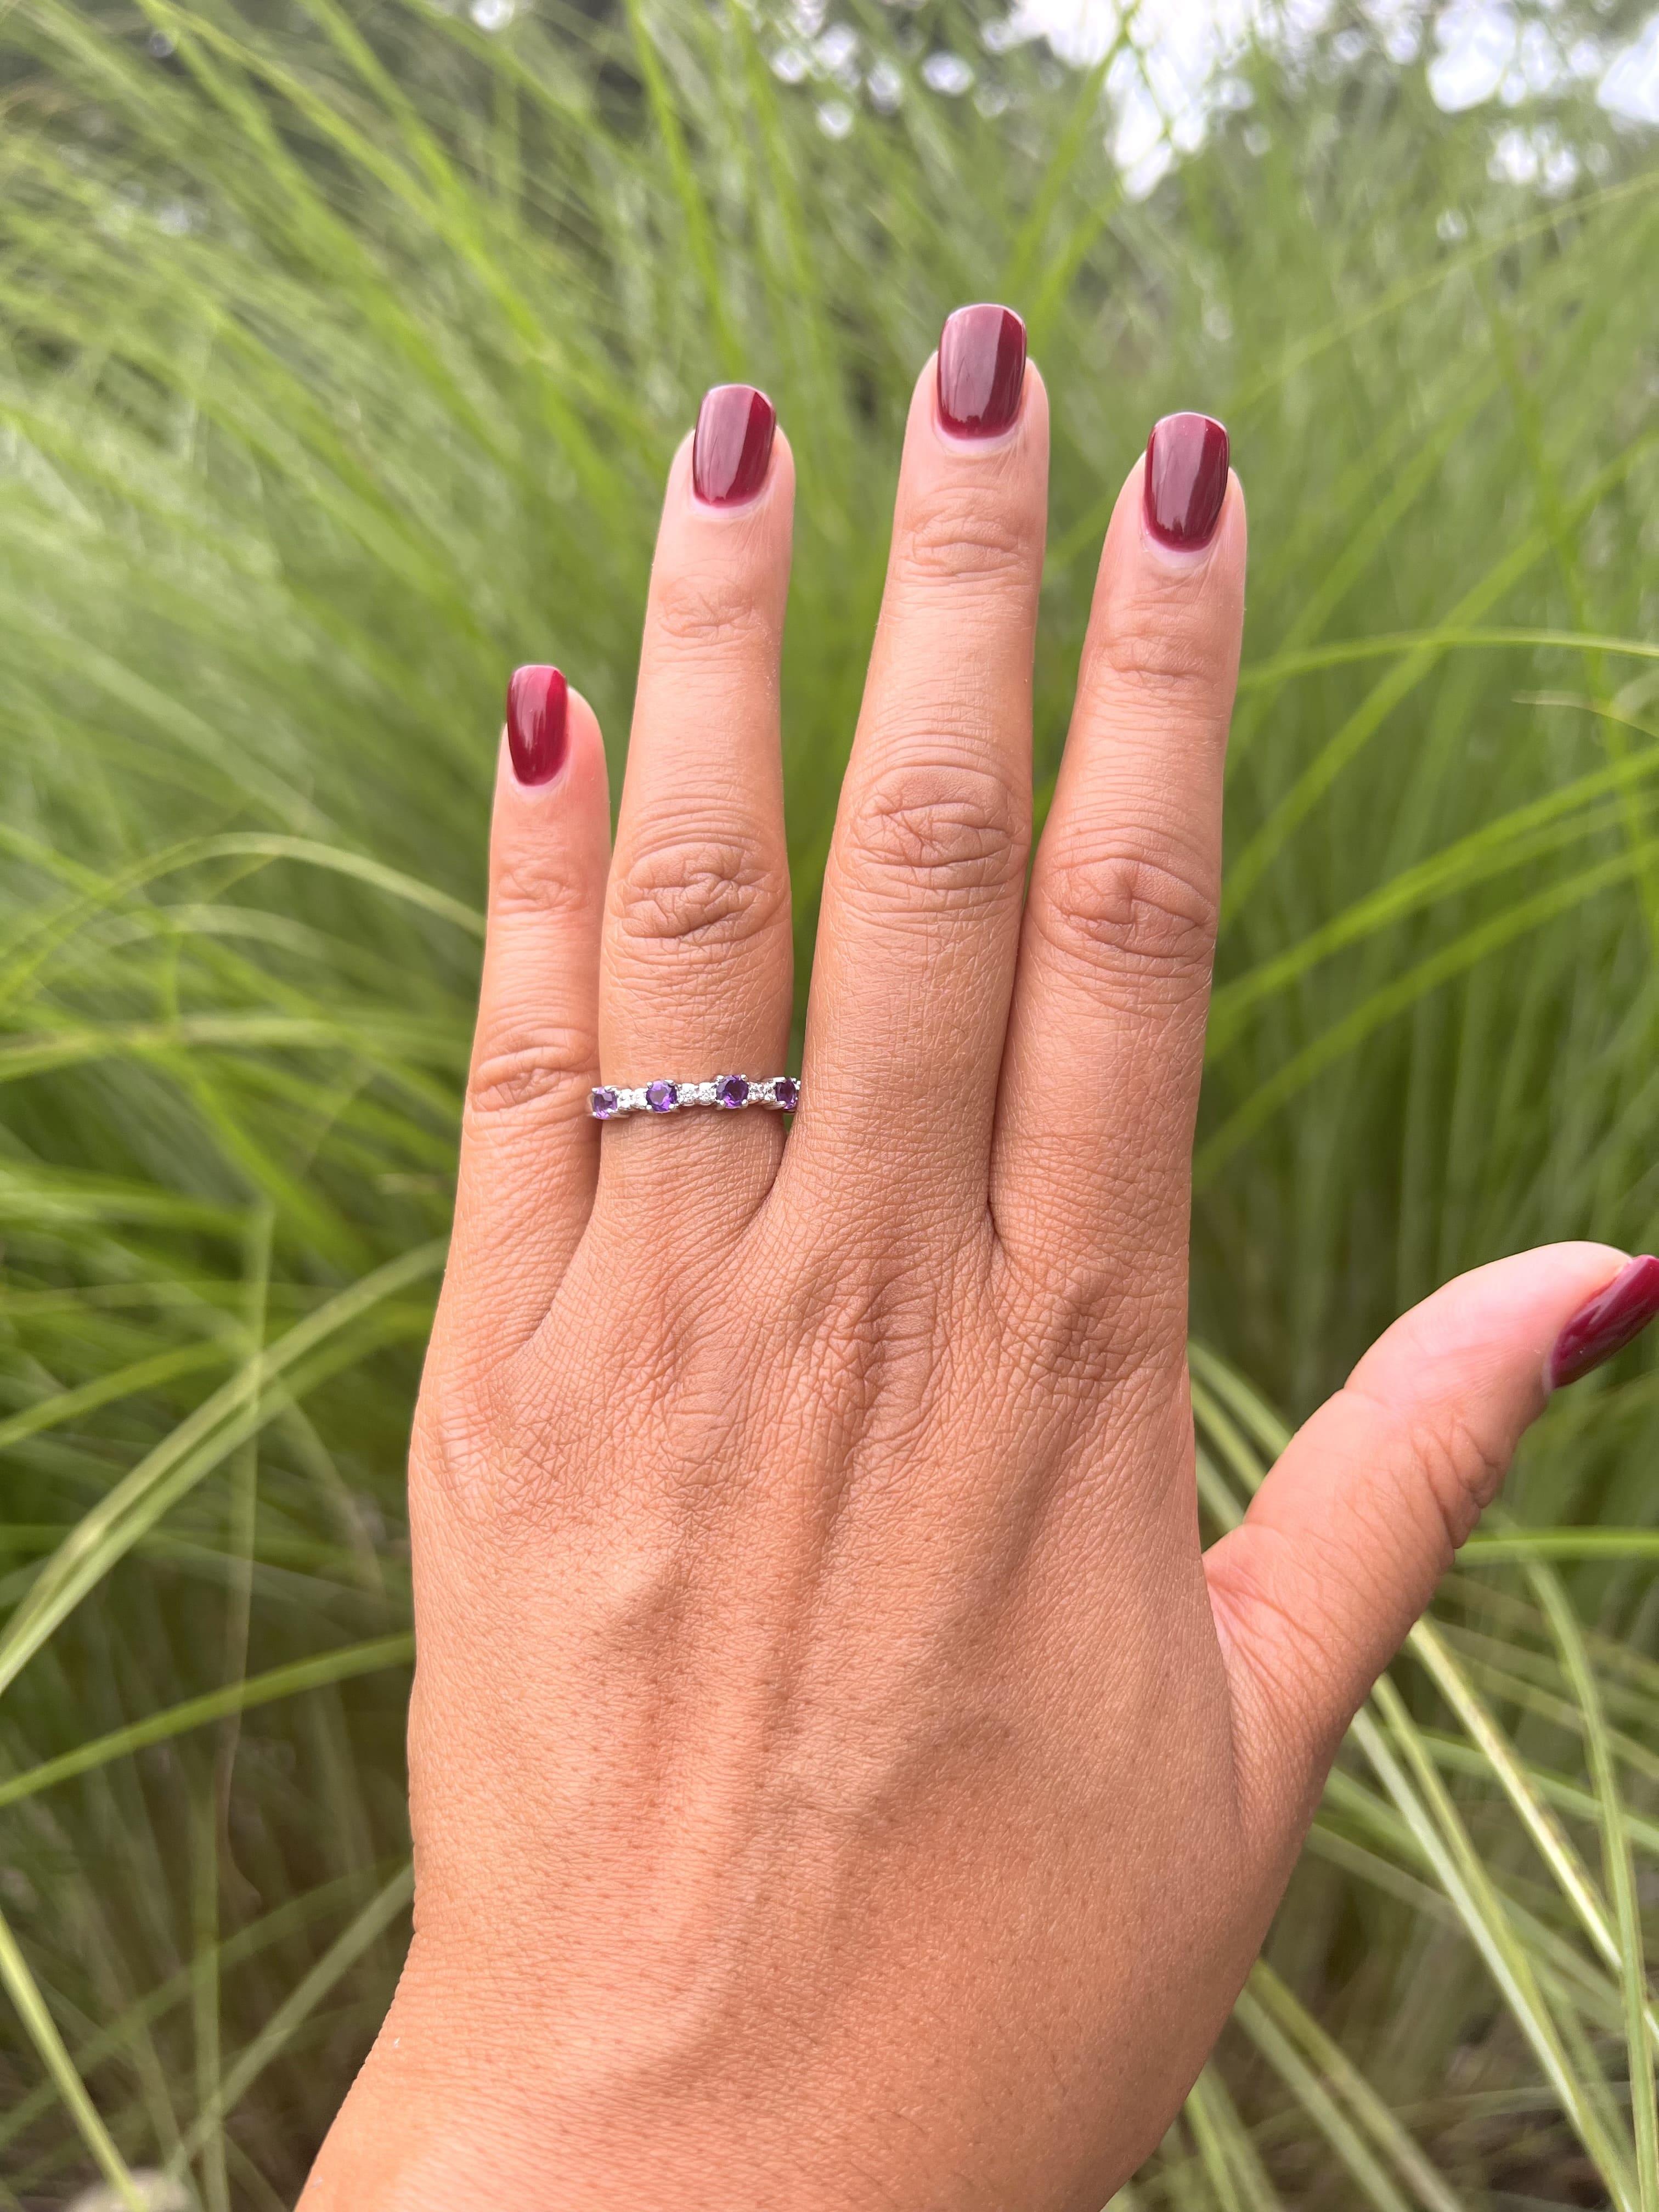 A beautiful everyday ring with amethyst and diamonds to add a pop of color to your everyday style.

14K Rose Gold Amethyst Ring with Diamonds
- Diamond weight: 0.11 ct total weight
- Diamond Quality: H/SI
- Amethyst weight: Aprrox. 0.55 ct weight